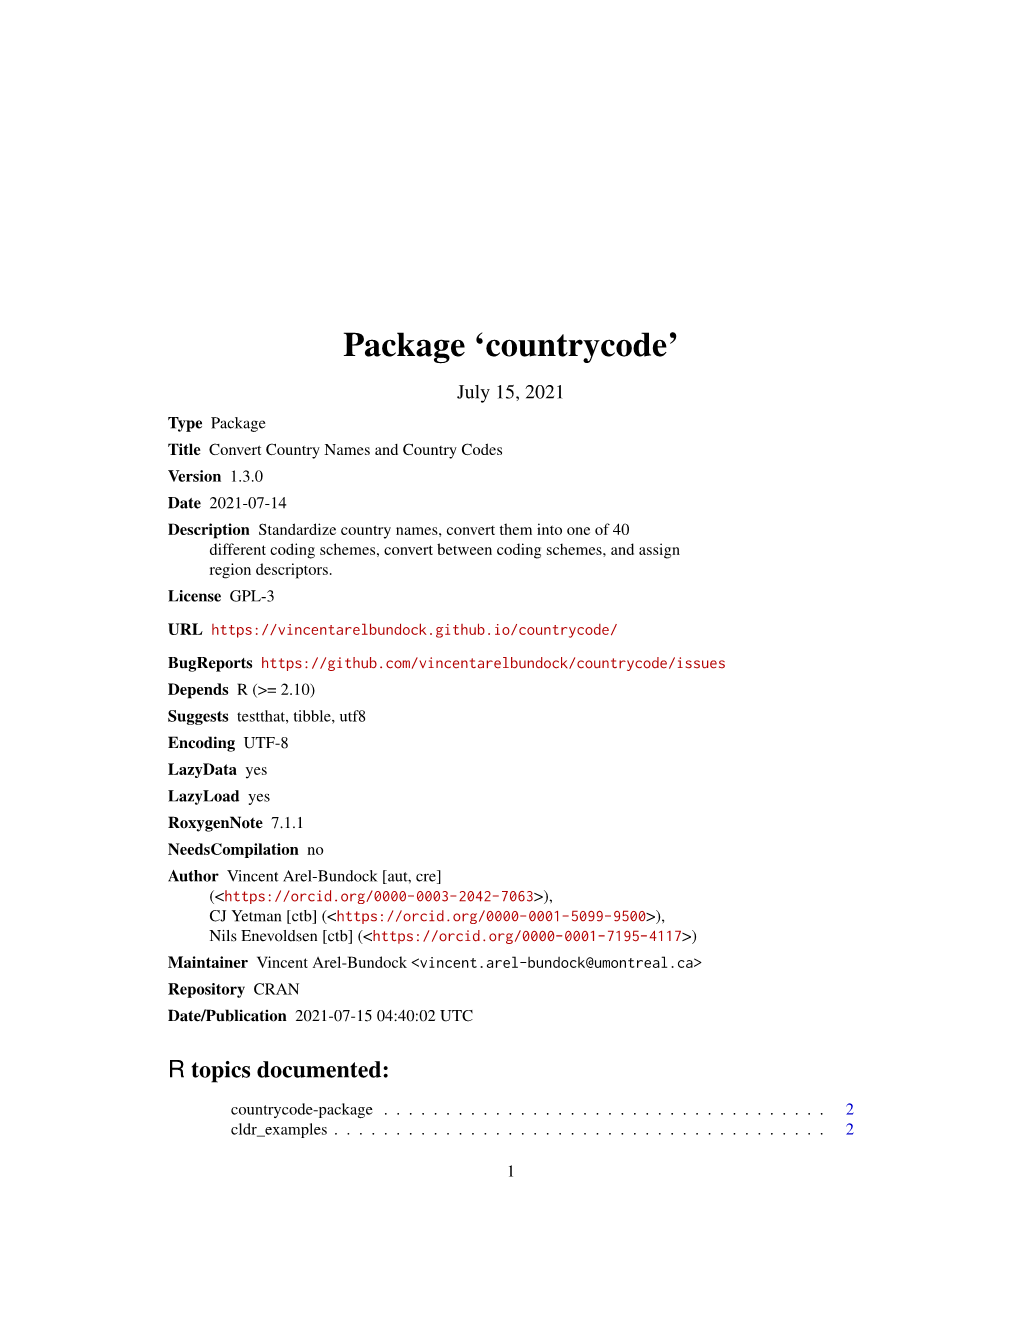 Countrycode: Convert Country Names and Country Codes